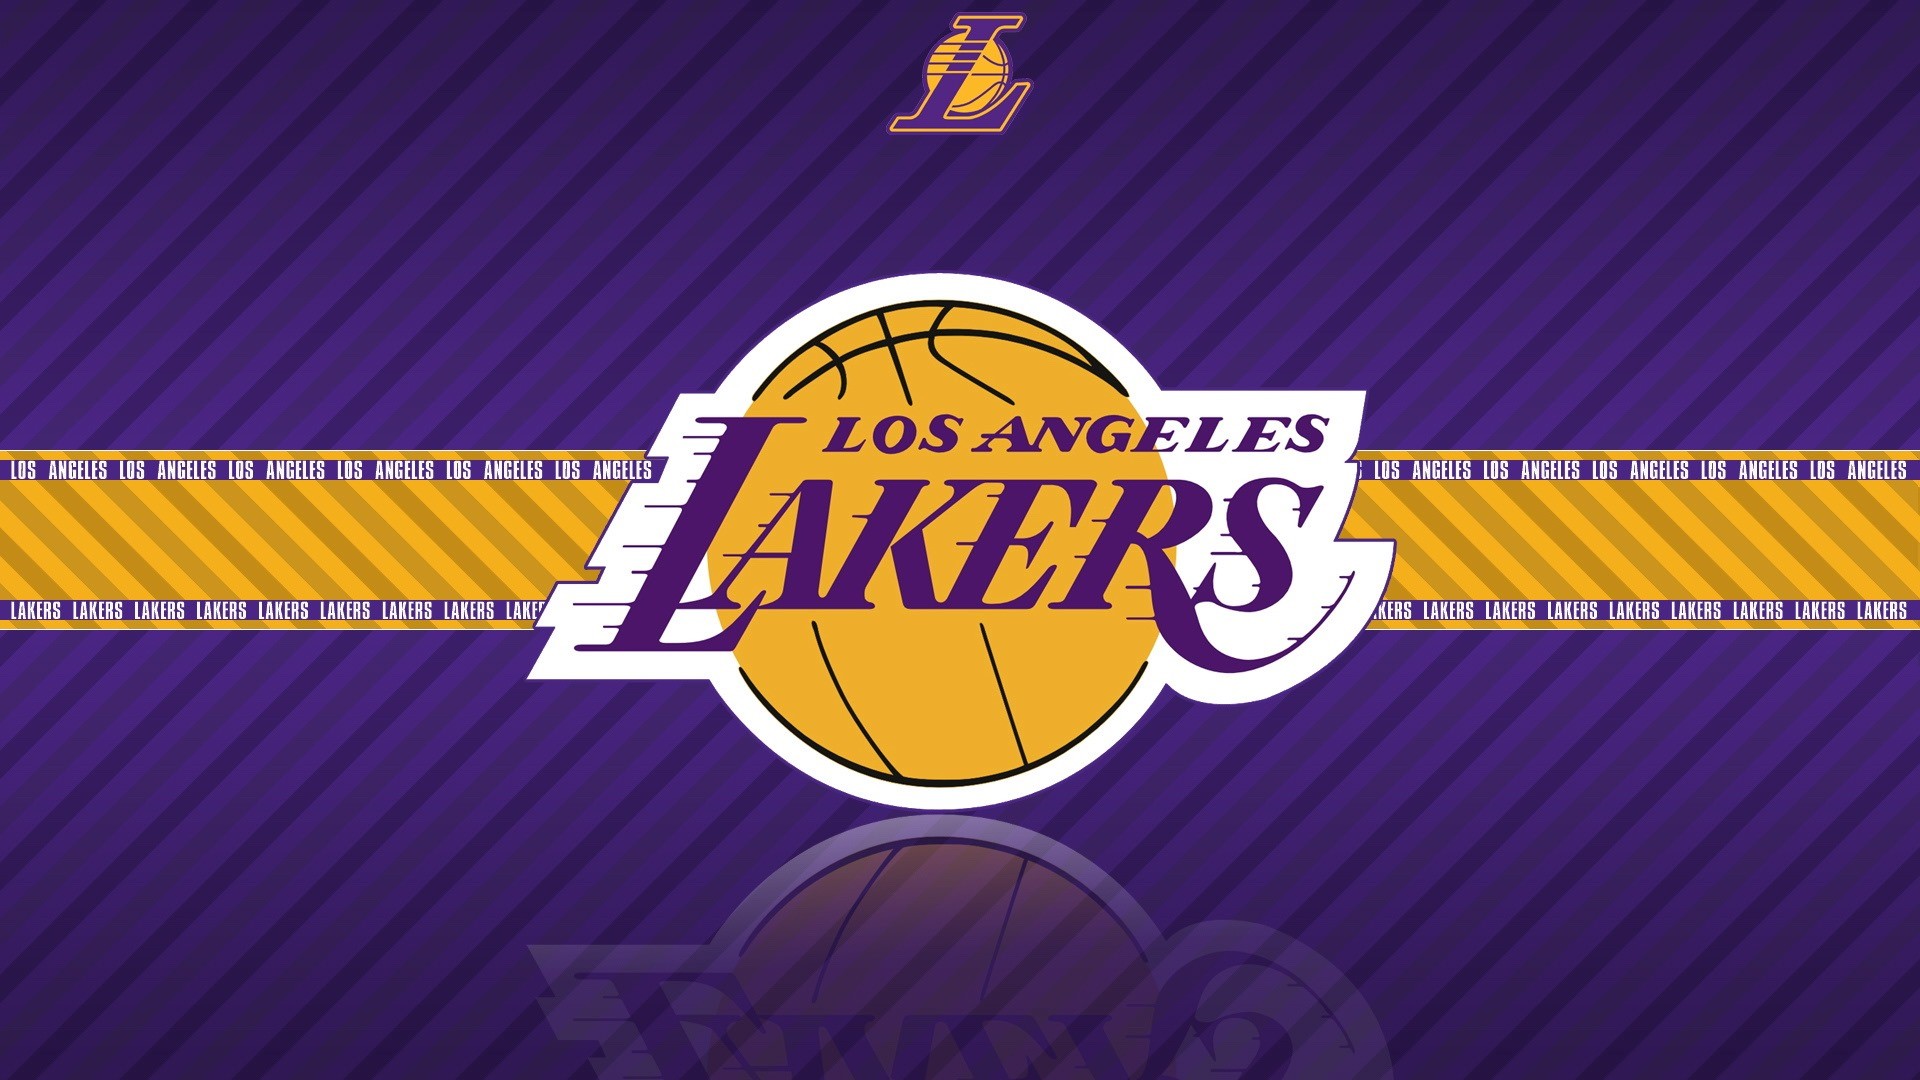 Lakers Wallpaper Images on HD Wallpapers Pinterest Hd wallpaper and Wallpaper